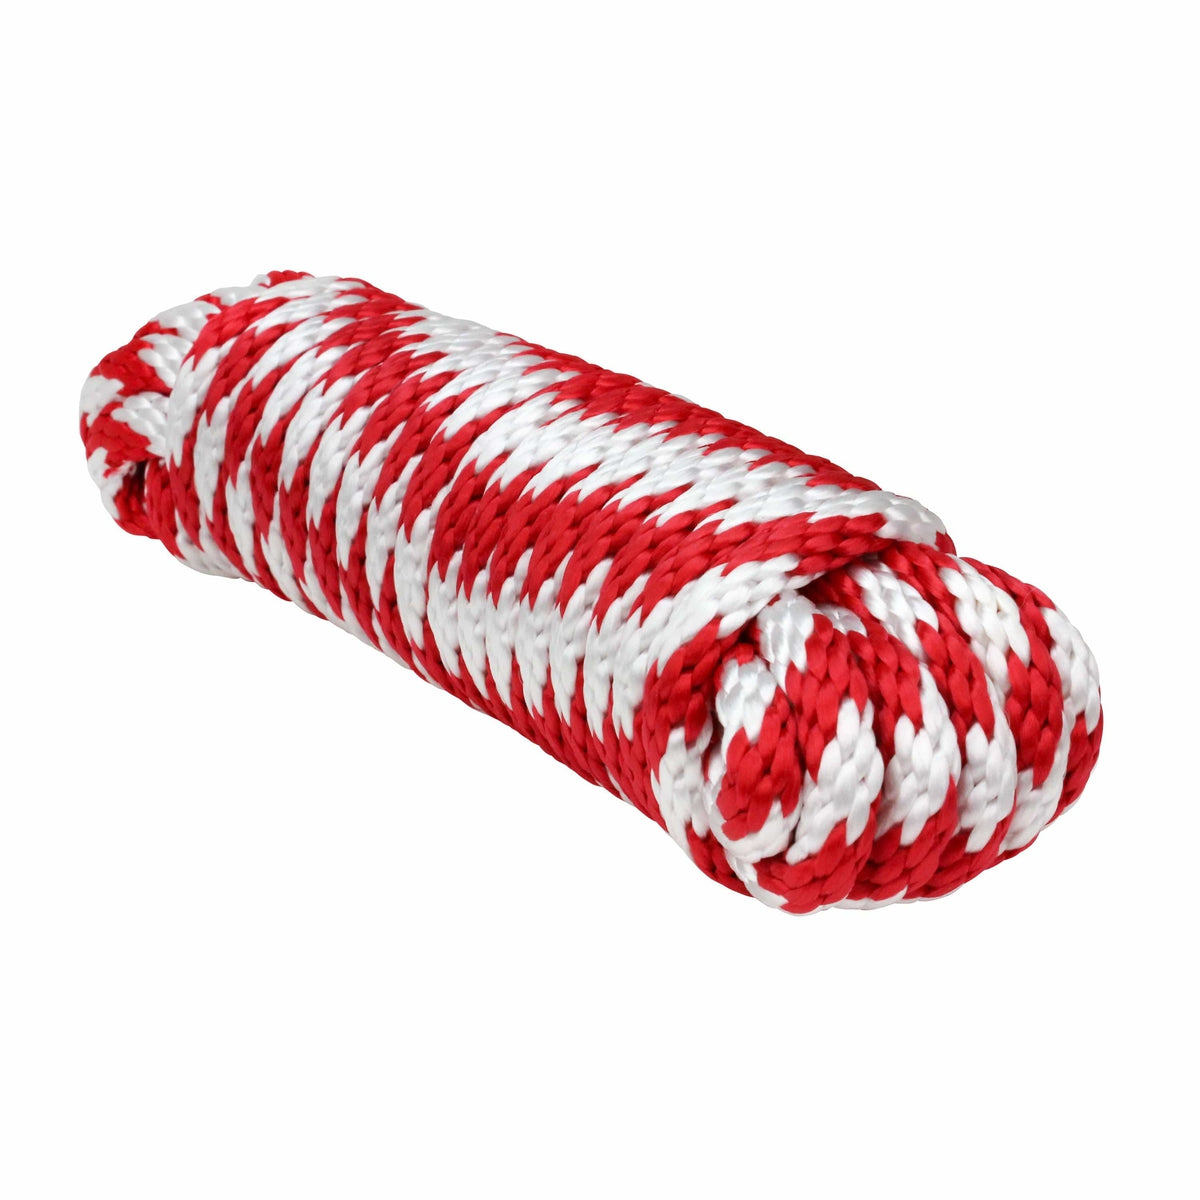 Extreme Max SB MFP Utility Rope 3/8" 100' Red/White #3008.0166